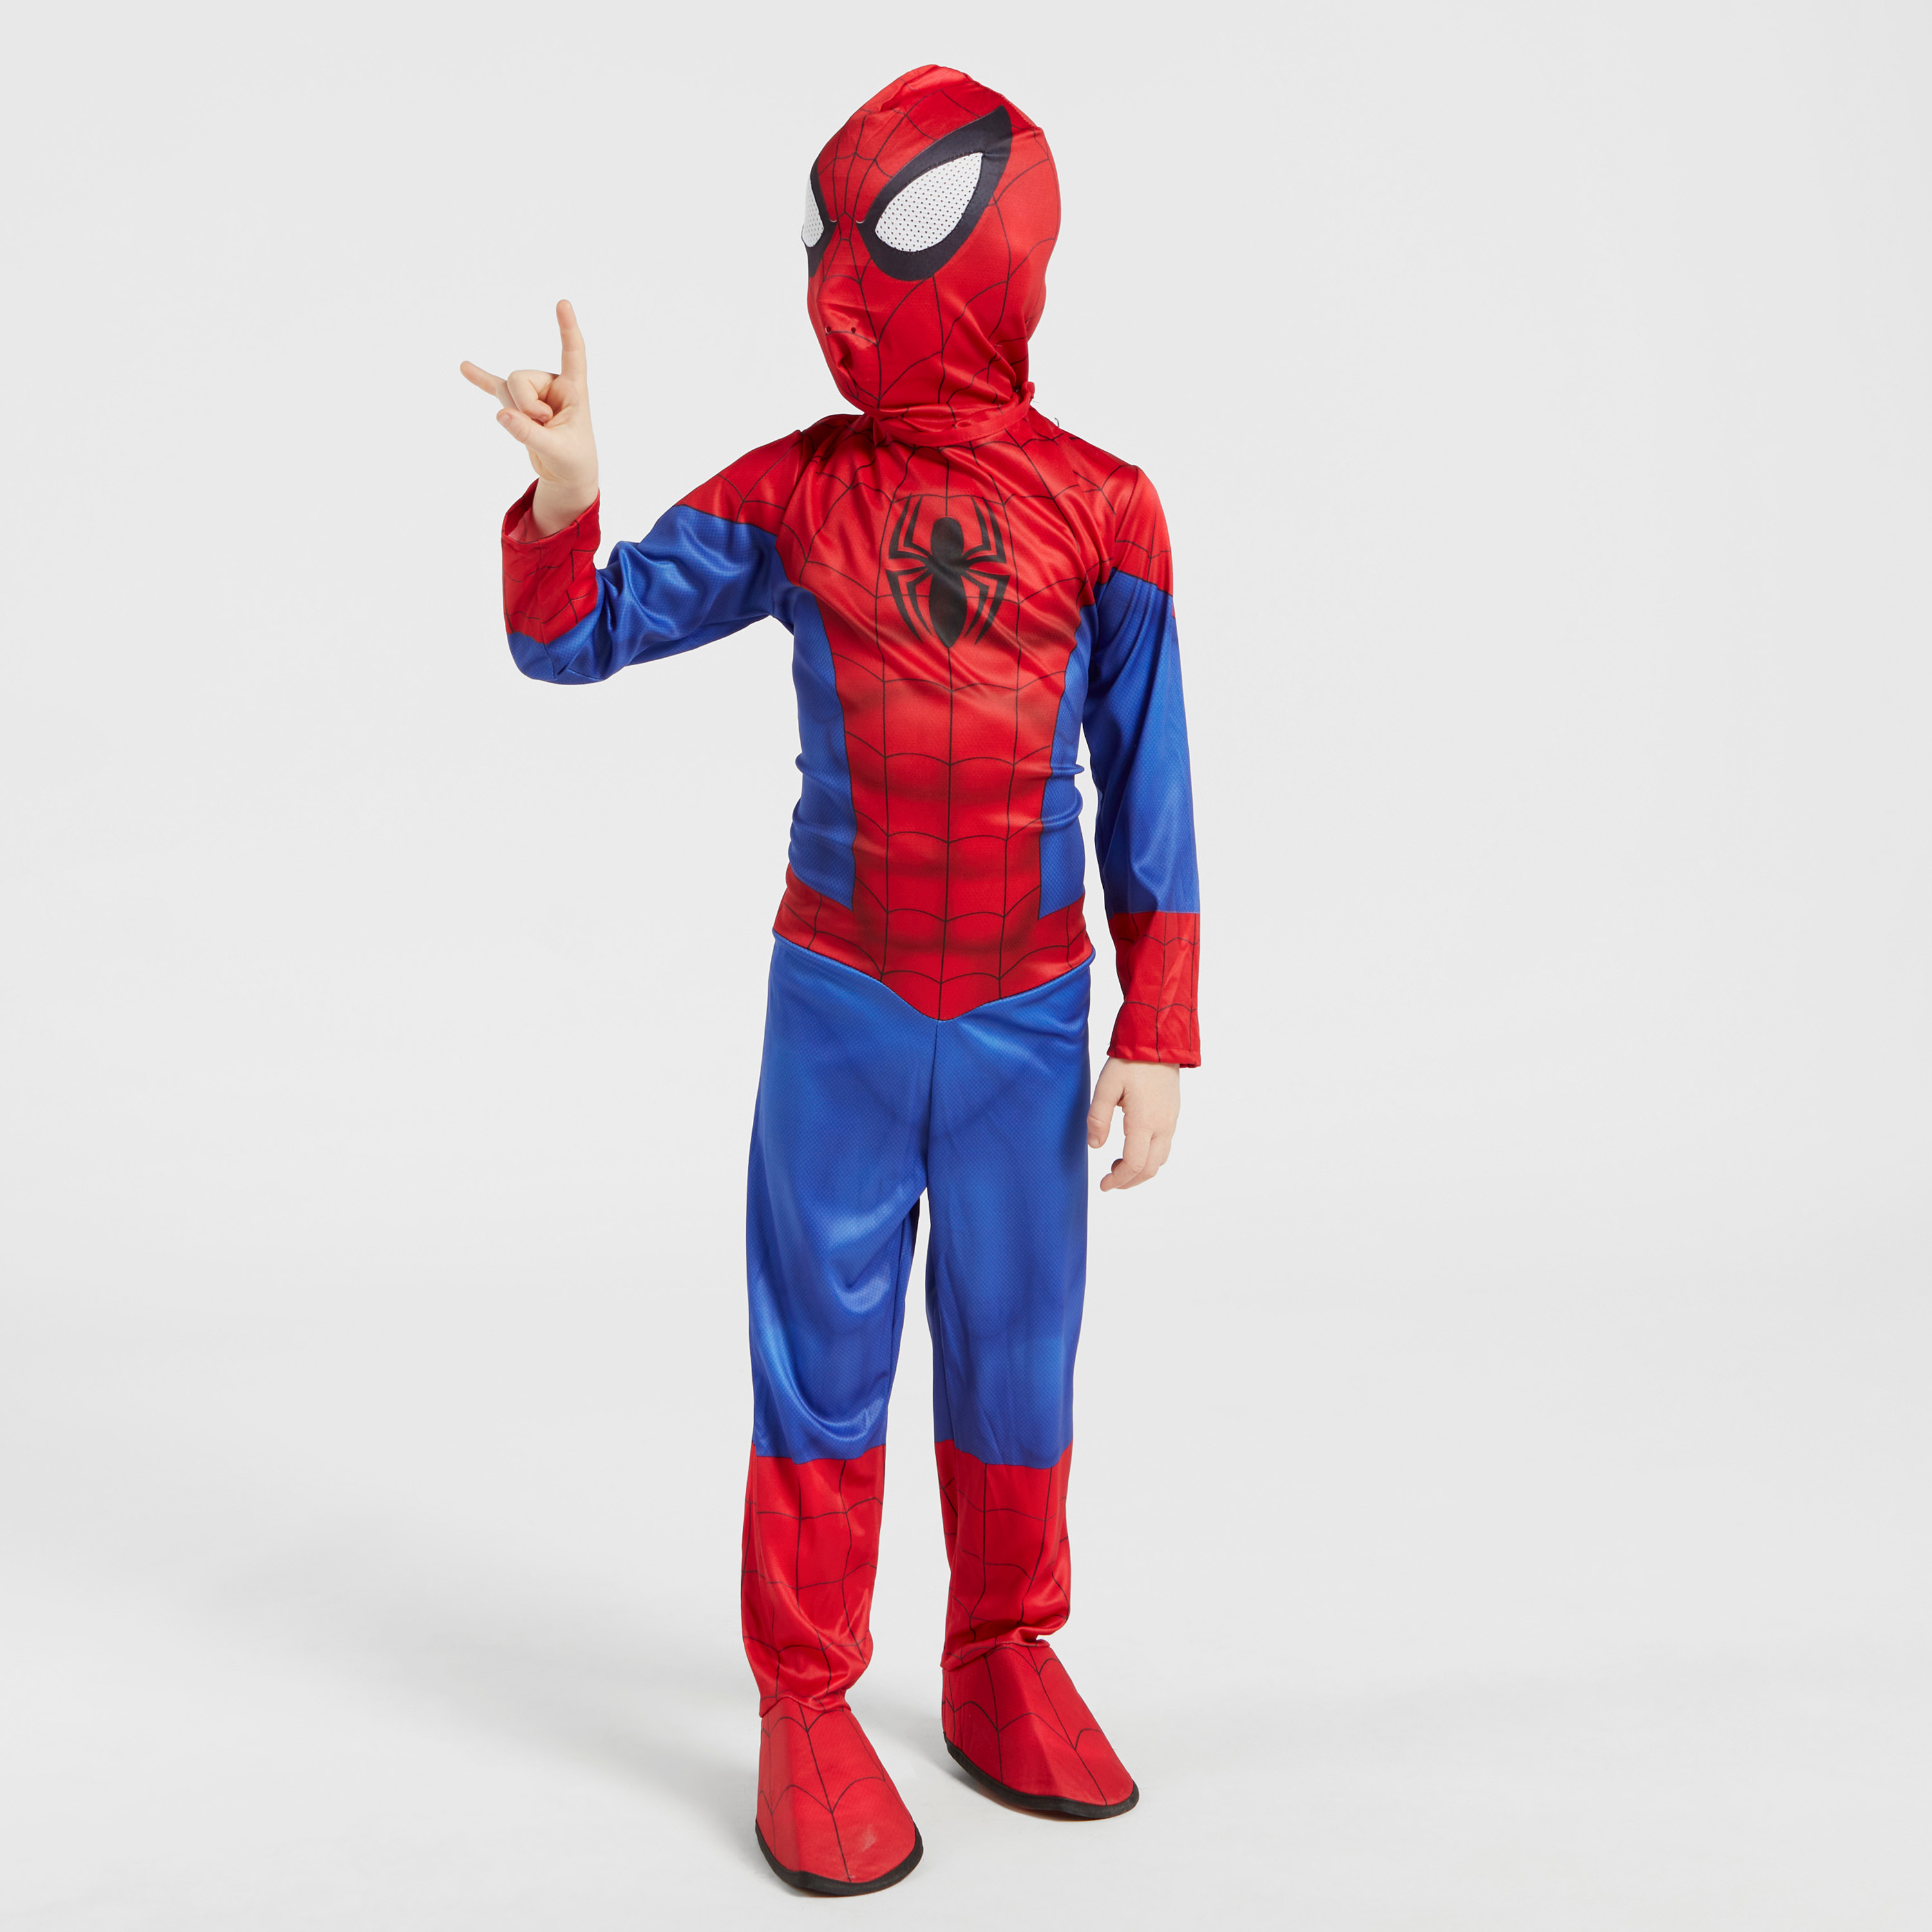 the amazing spider-man cosplay suit for kids and adult